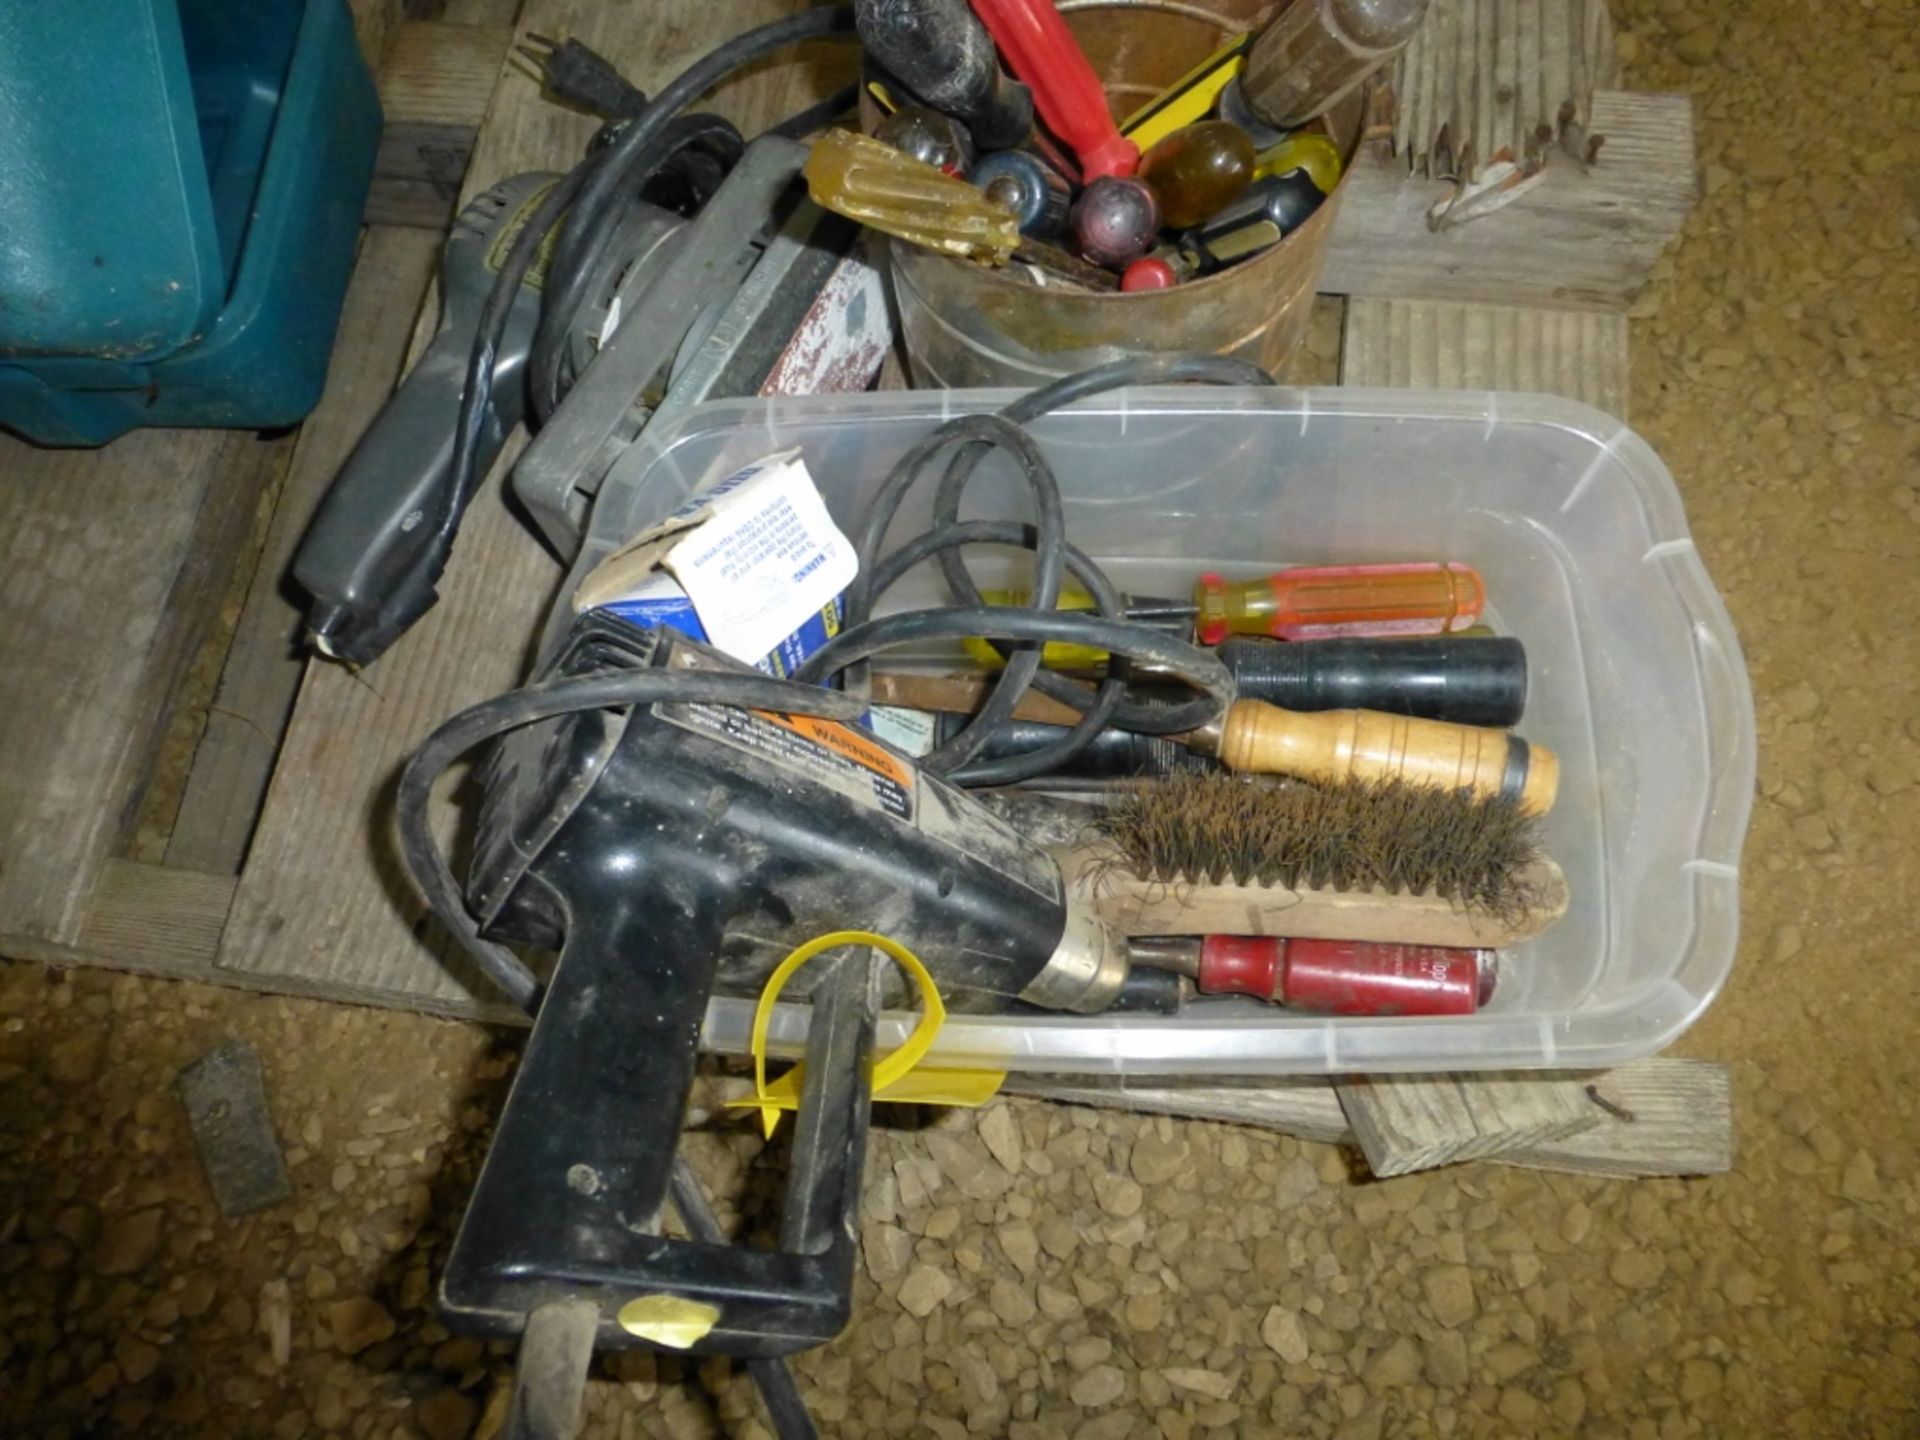 Tub with sander, drill, wire brush, screwdrivers, etc.